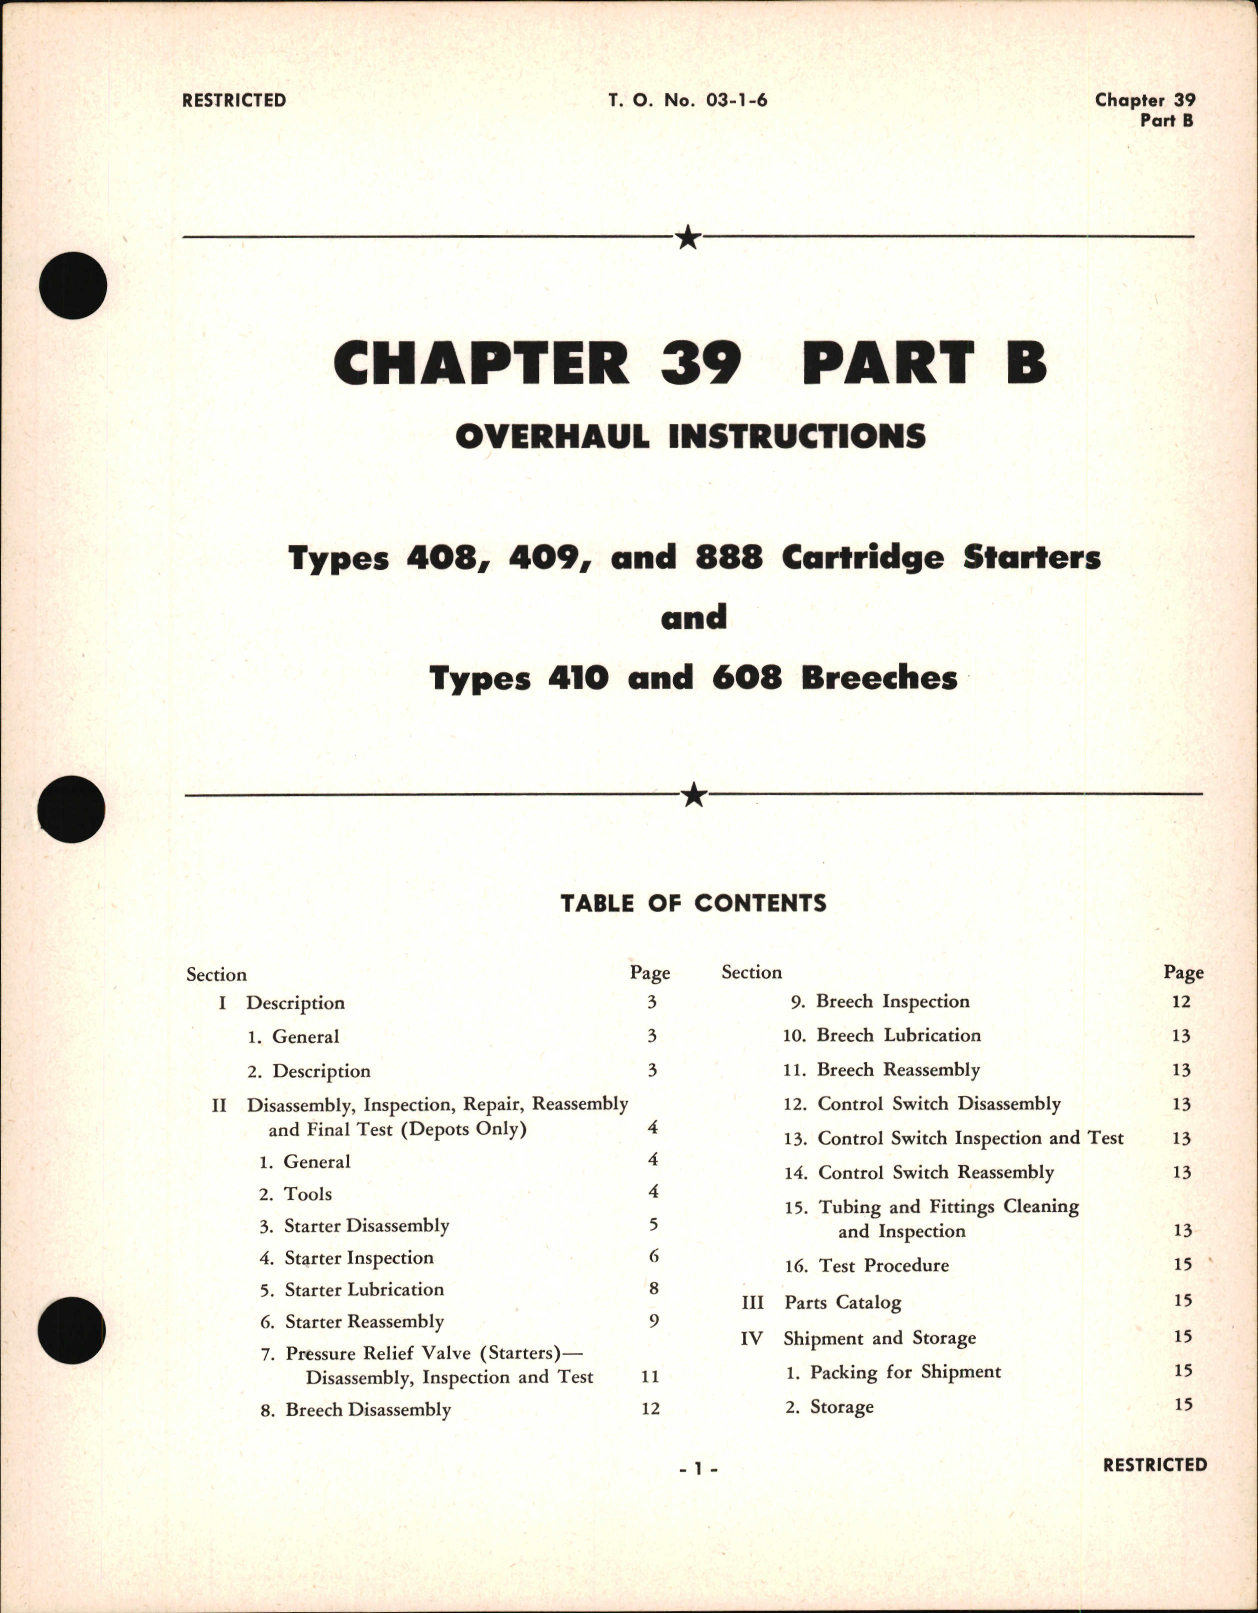 Sample page 1 from AirCorps Library document: Overhaul Instruction for Cartridge Starters and Breeches, Chapter 39 Part B